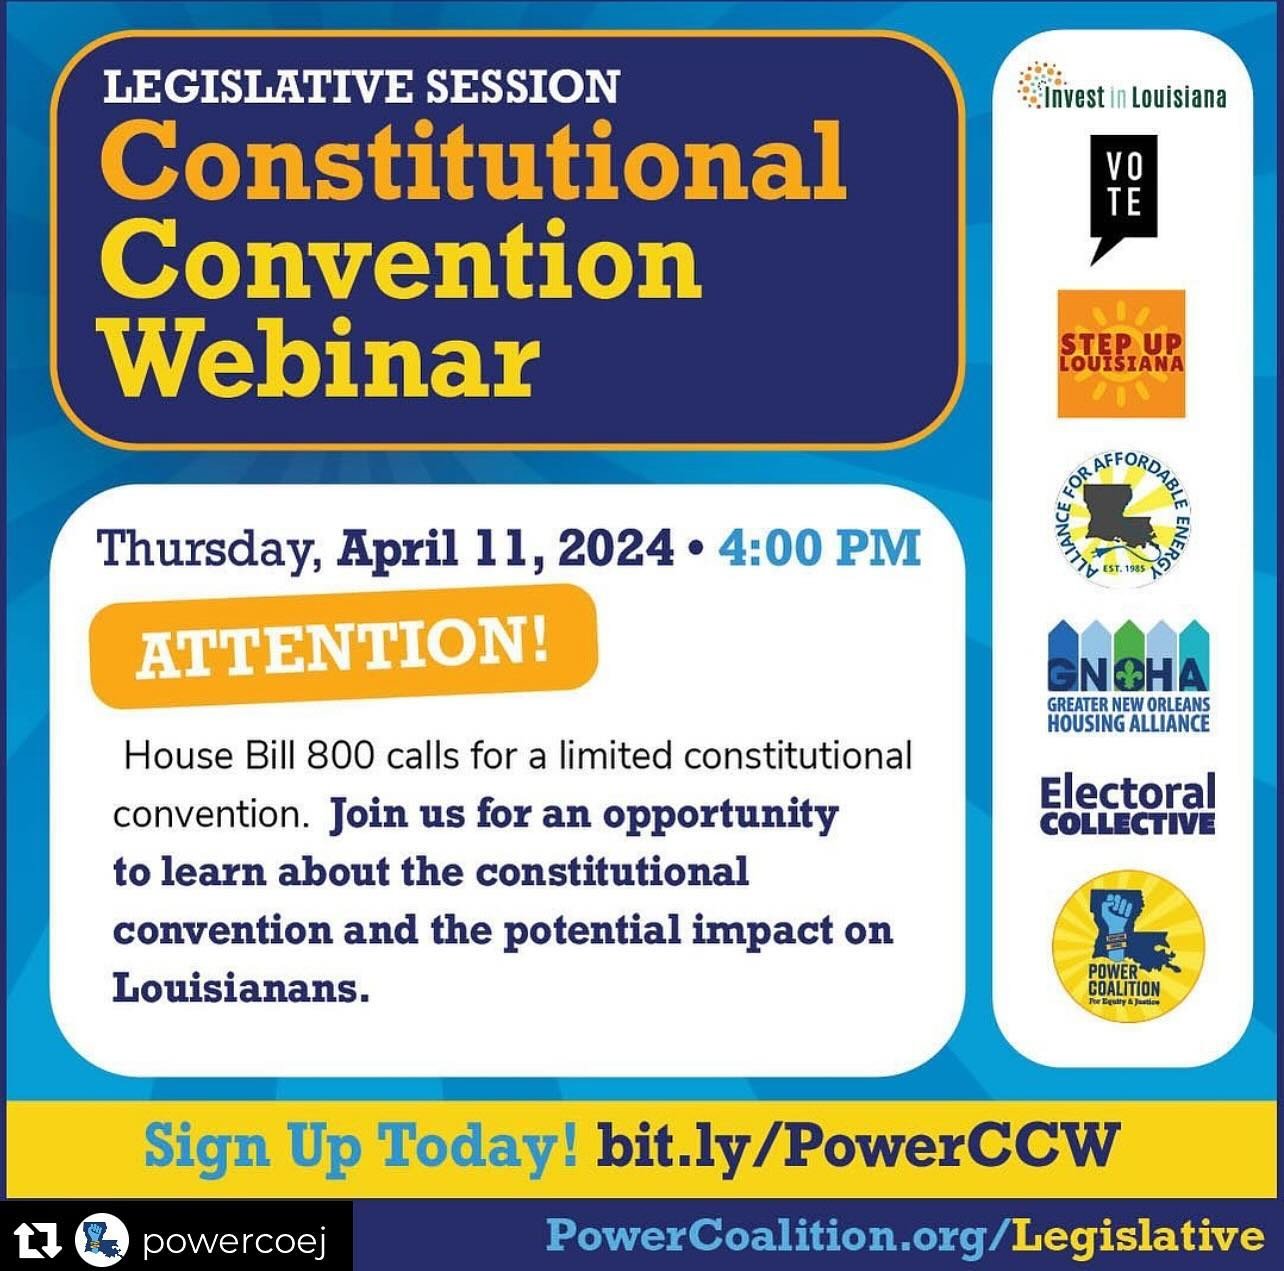 REPOST:
&bull;
&bull;
&bull;
TOMORROW!!! 

Constitutional Convention Webinar Hosted by Power Coalition and Our Partners (@stepuplouisiana, @stepupla @voiceoftheexperienced @all_4_energy @gnohousingalliance @investinlouisiana) 

House Bill 800 calls f